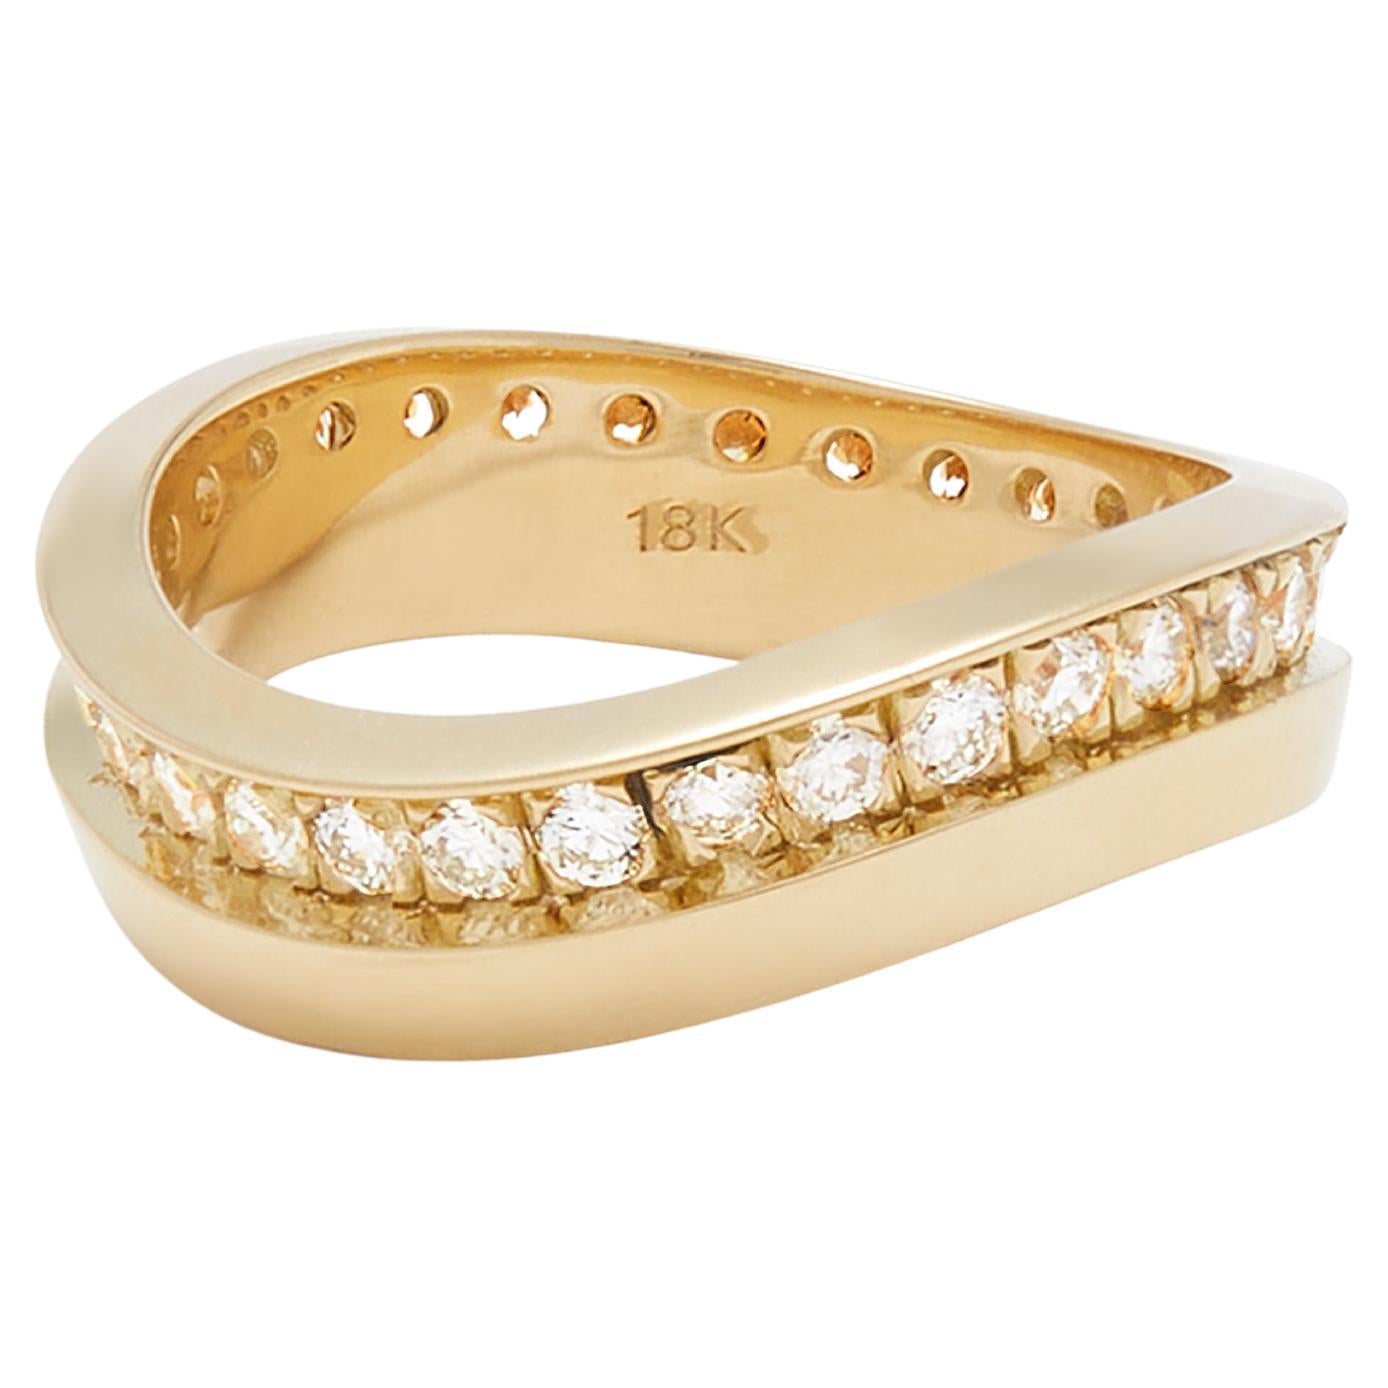 Casey Perez Tiered 18K Gold and Diamond Wave Band Stackable Ring - sz 6 For Sale